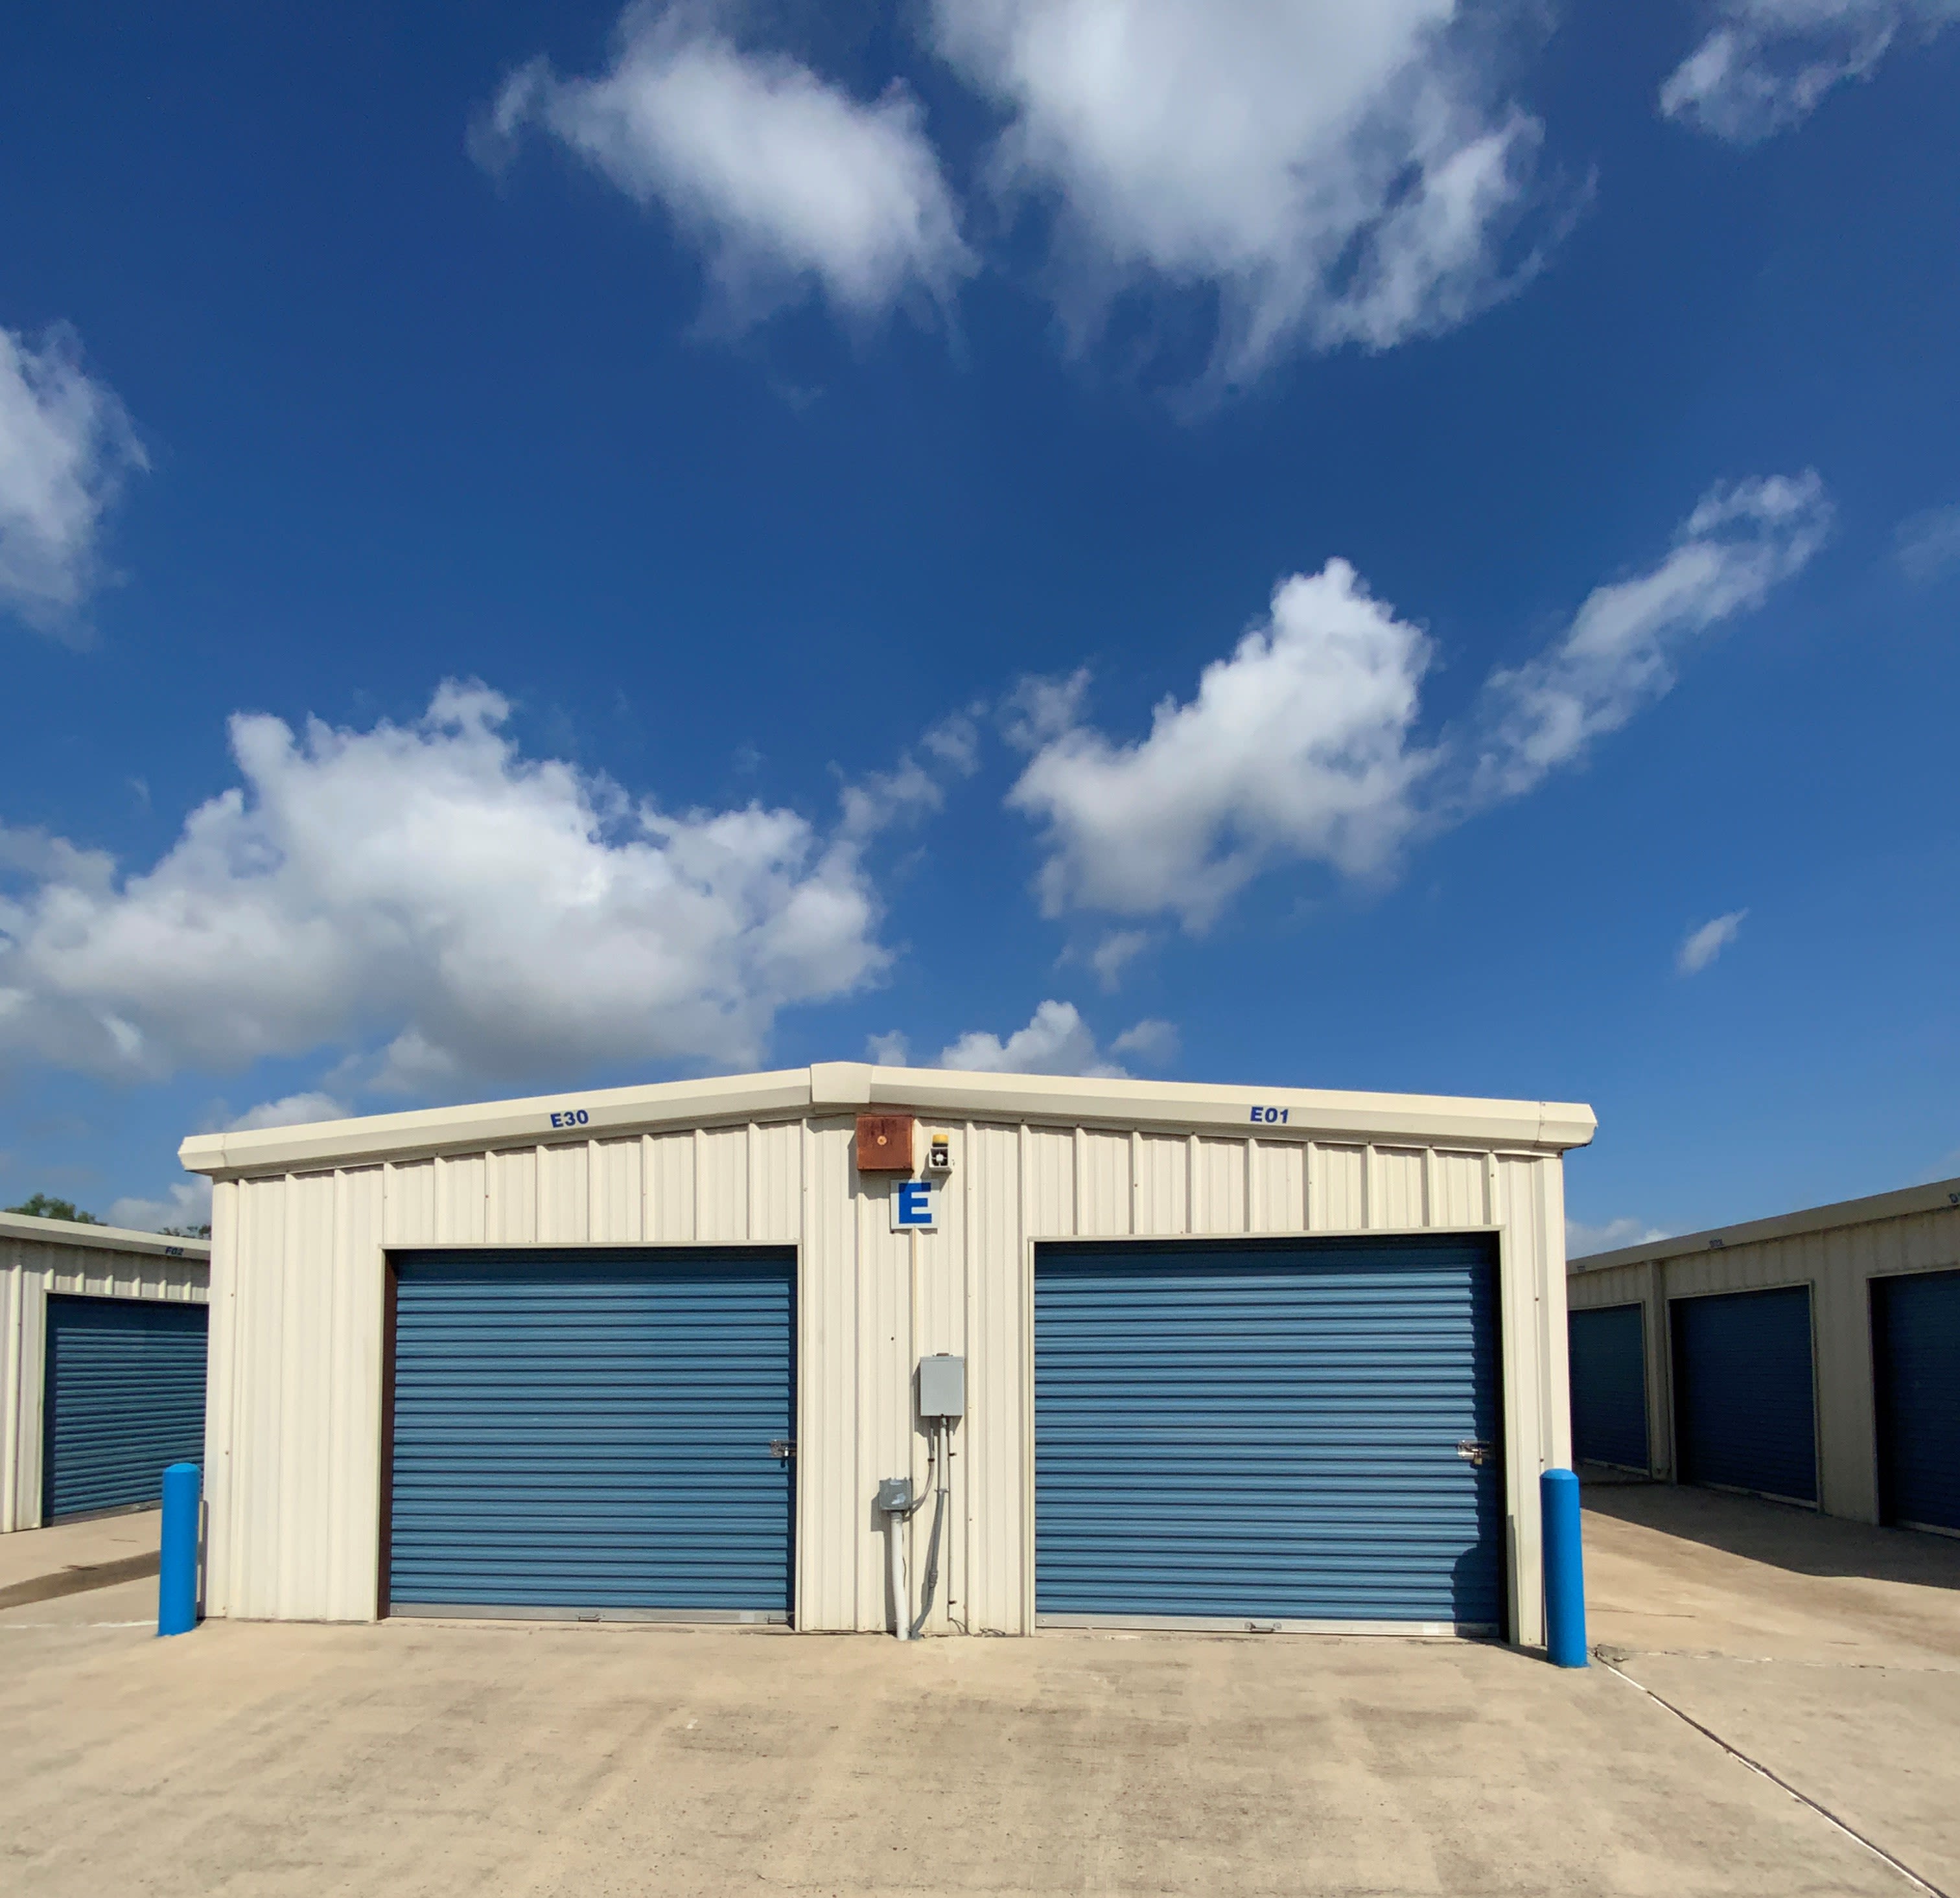 View our list of features at KO Storage in San Benito, Texas